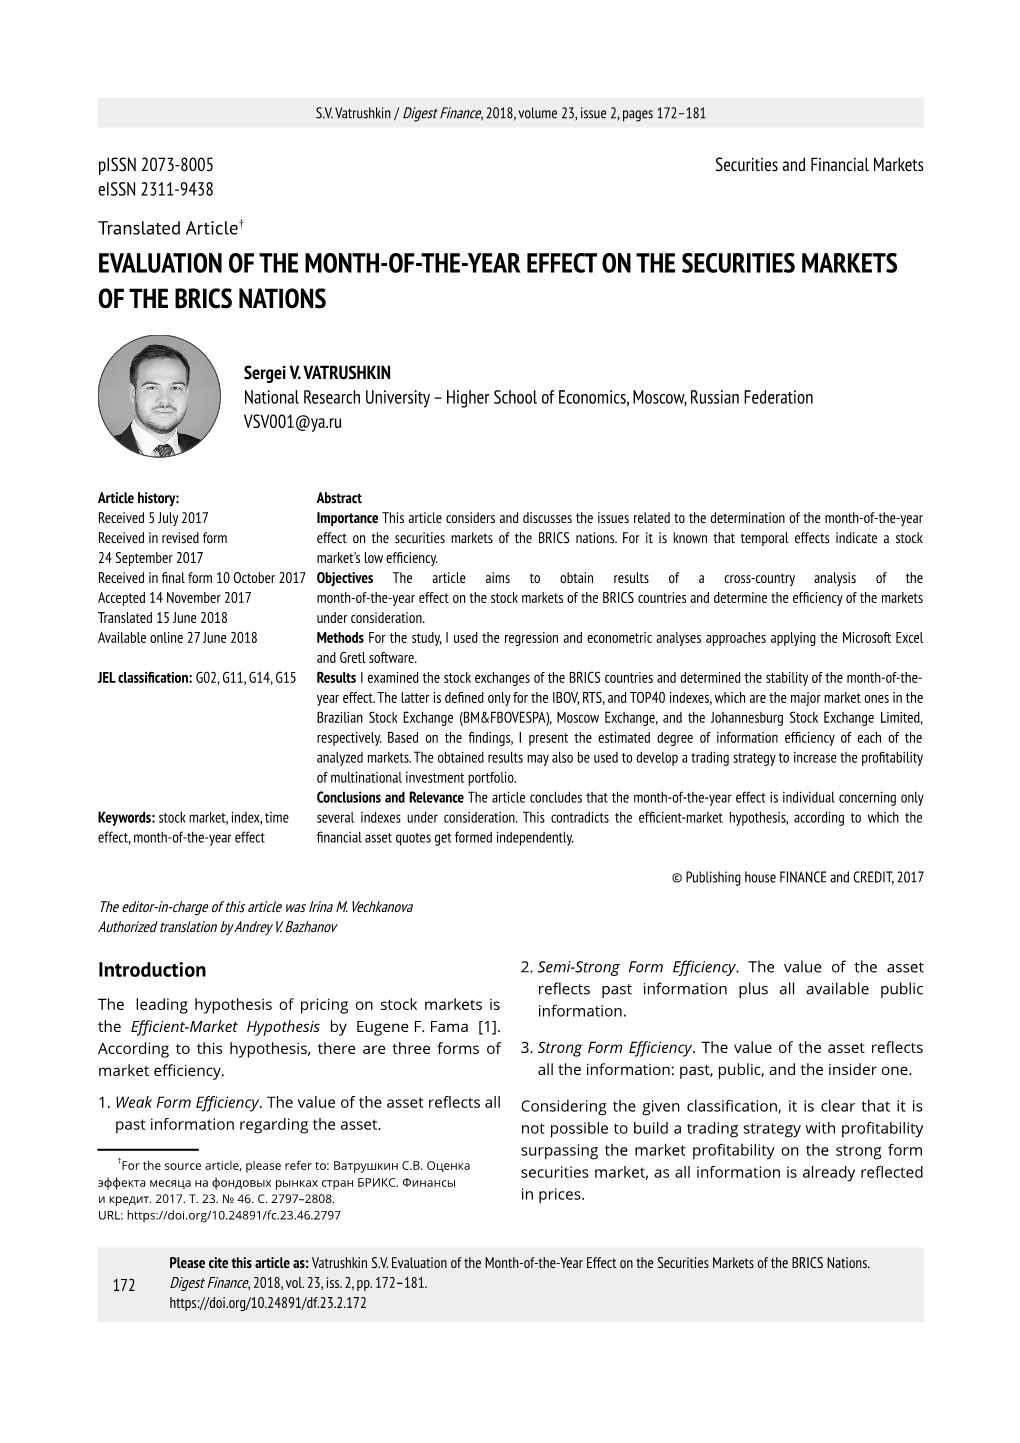 Evaluation of the Month-Of-The-Year Effect on the Securities Markets of the Brics Nations